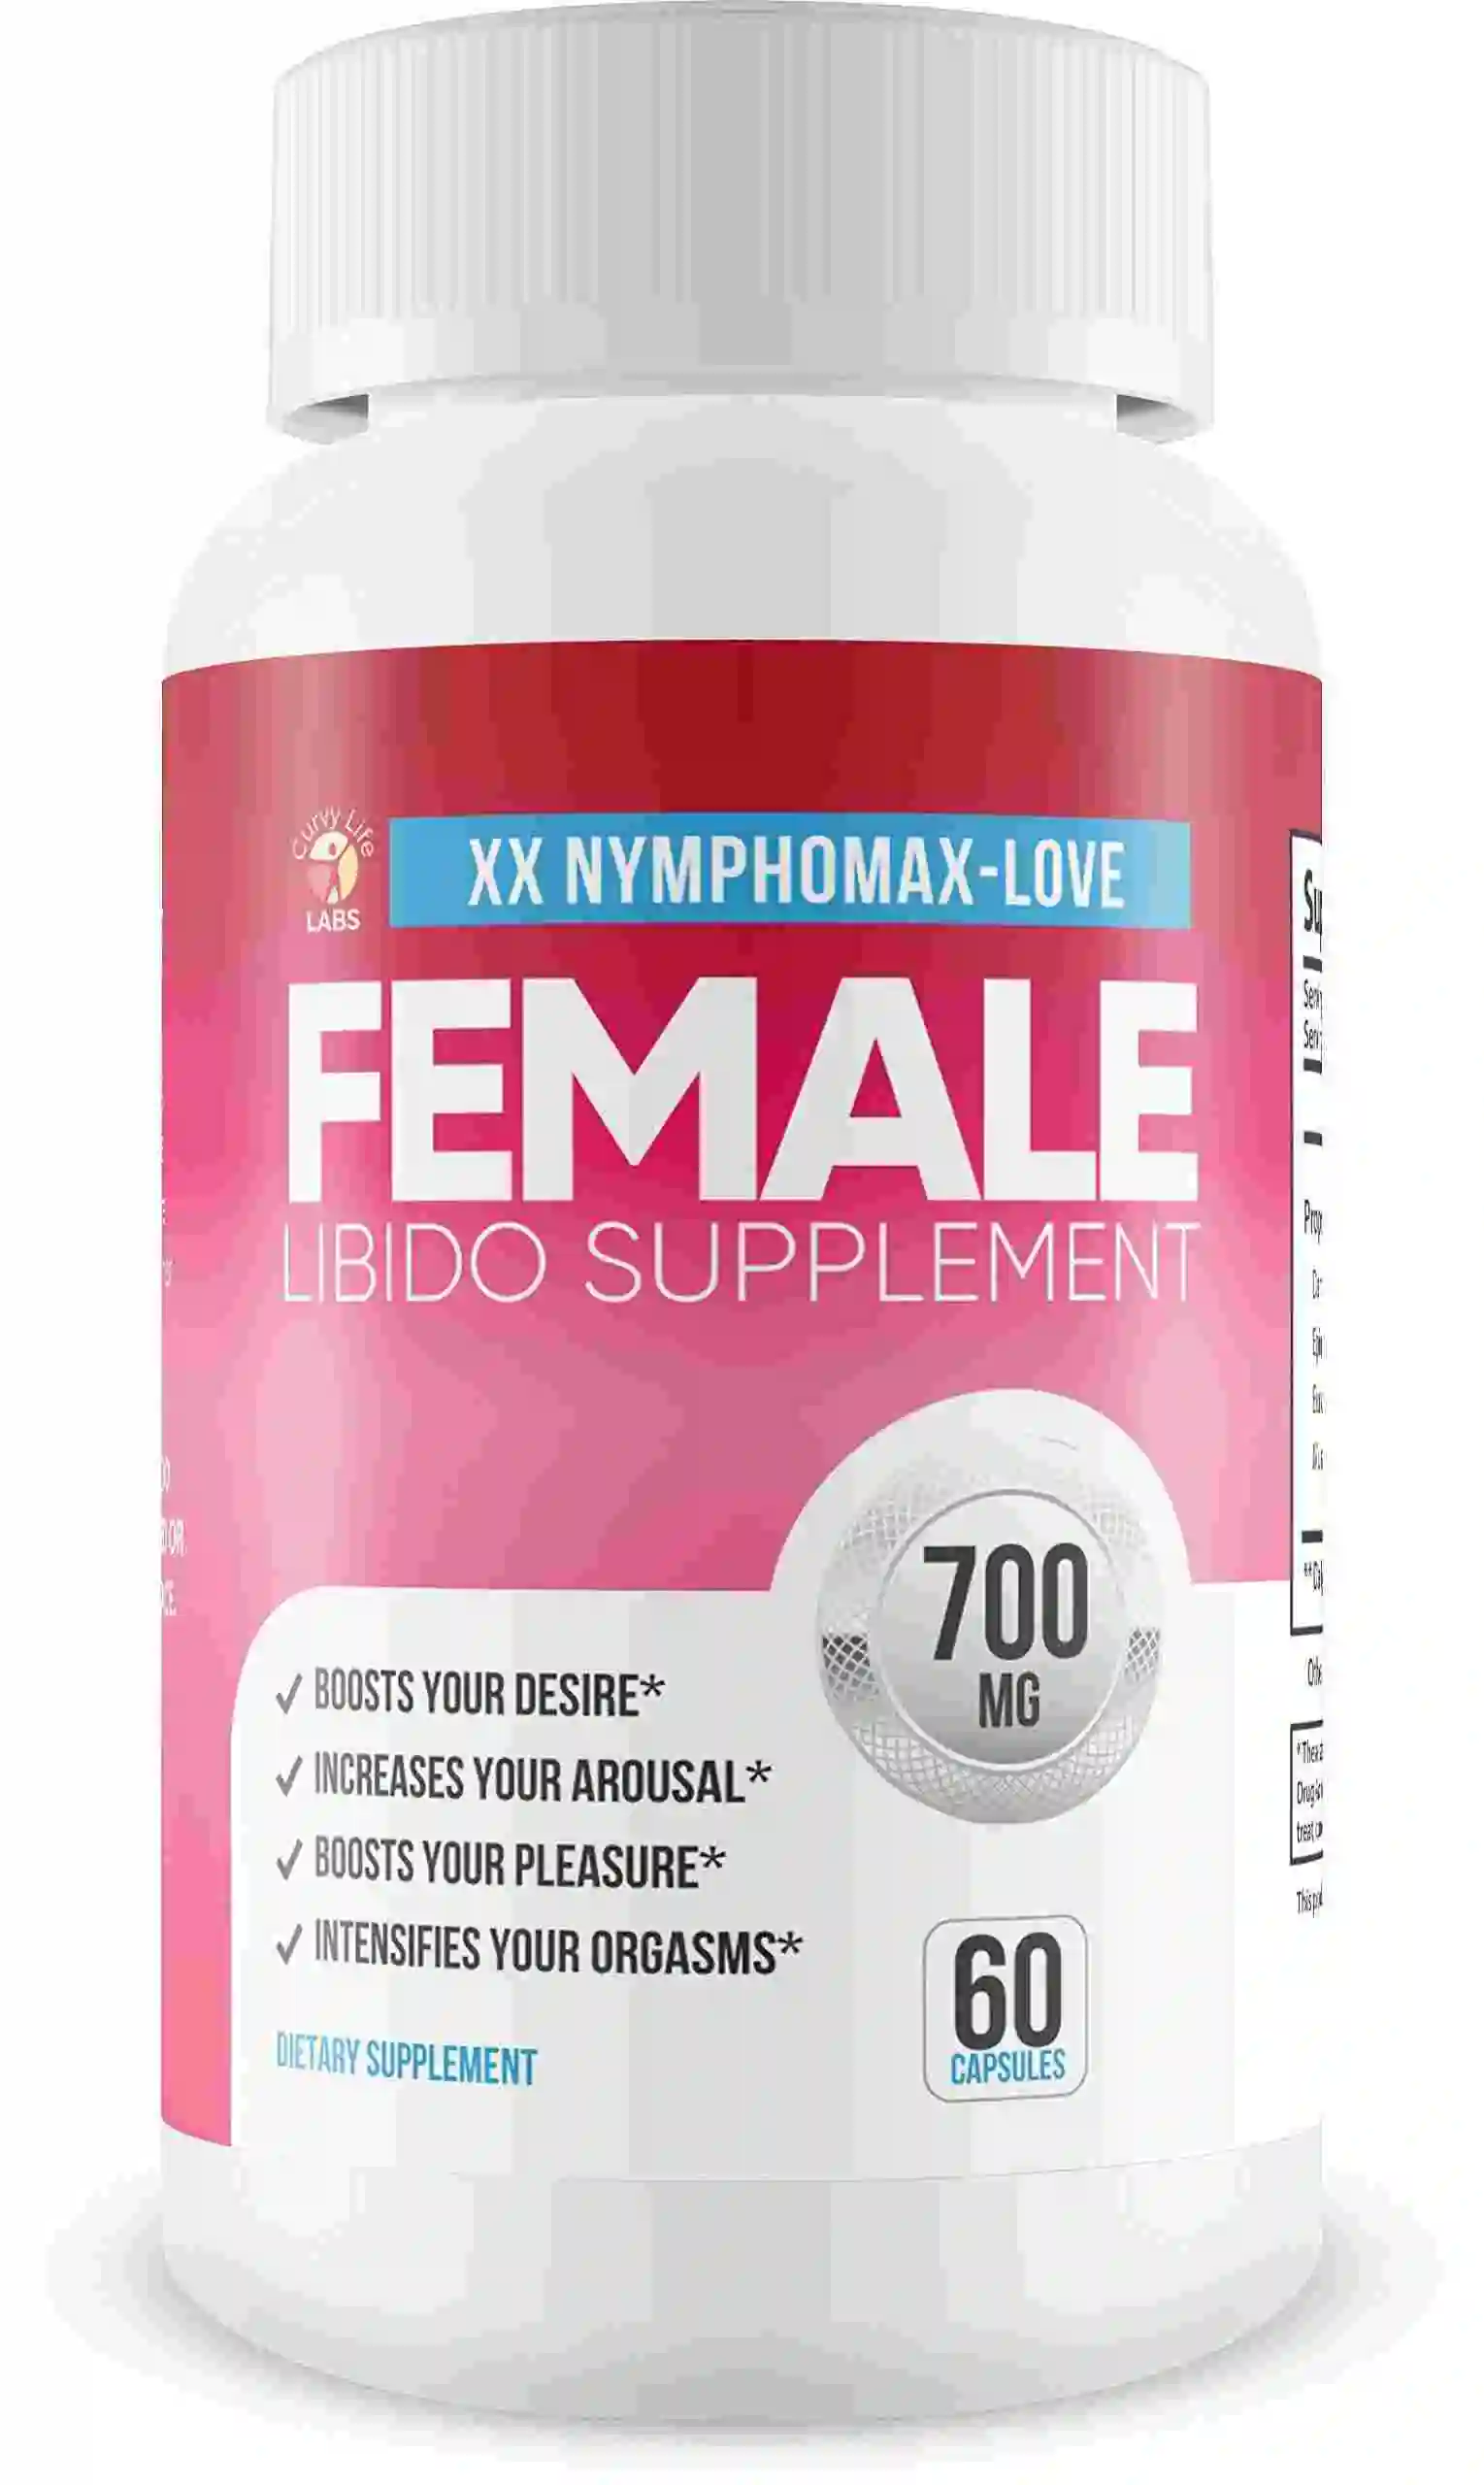 Nymphomax sex tablet for women